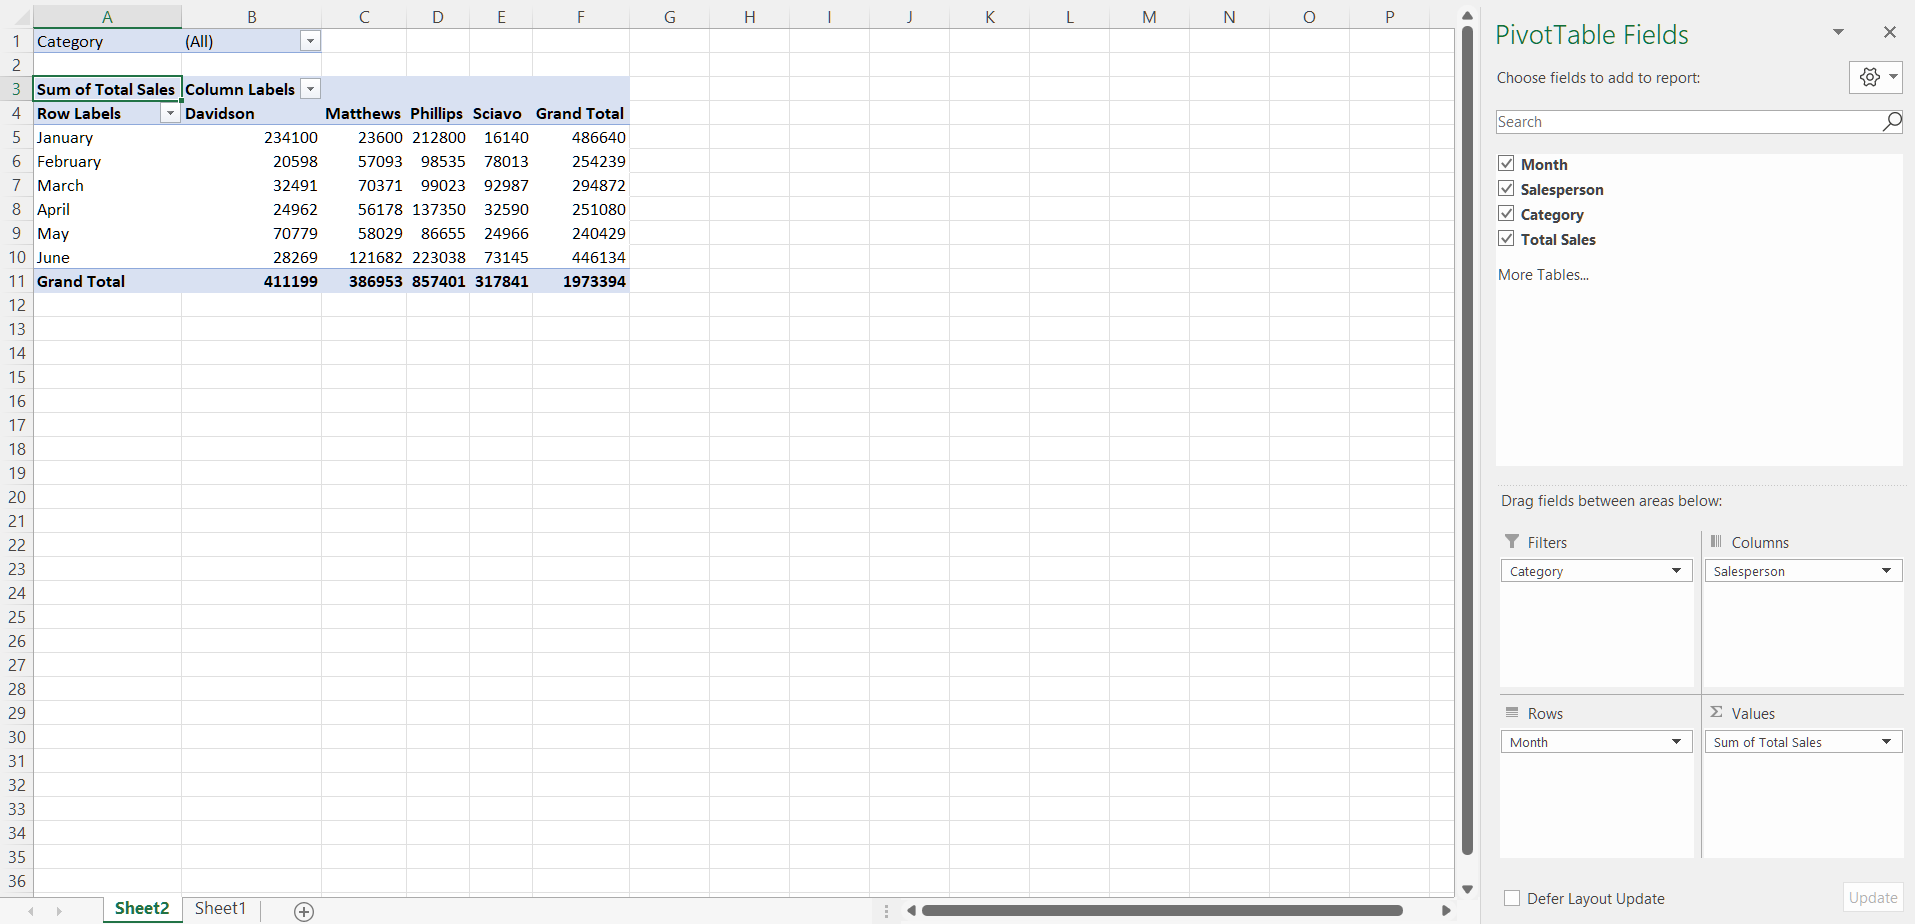 The first version of your pivot table